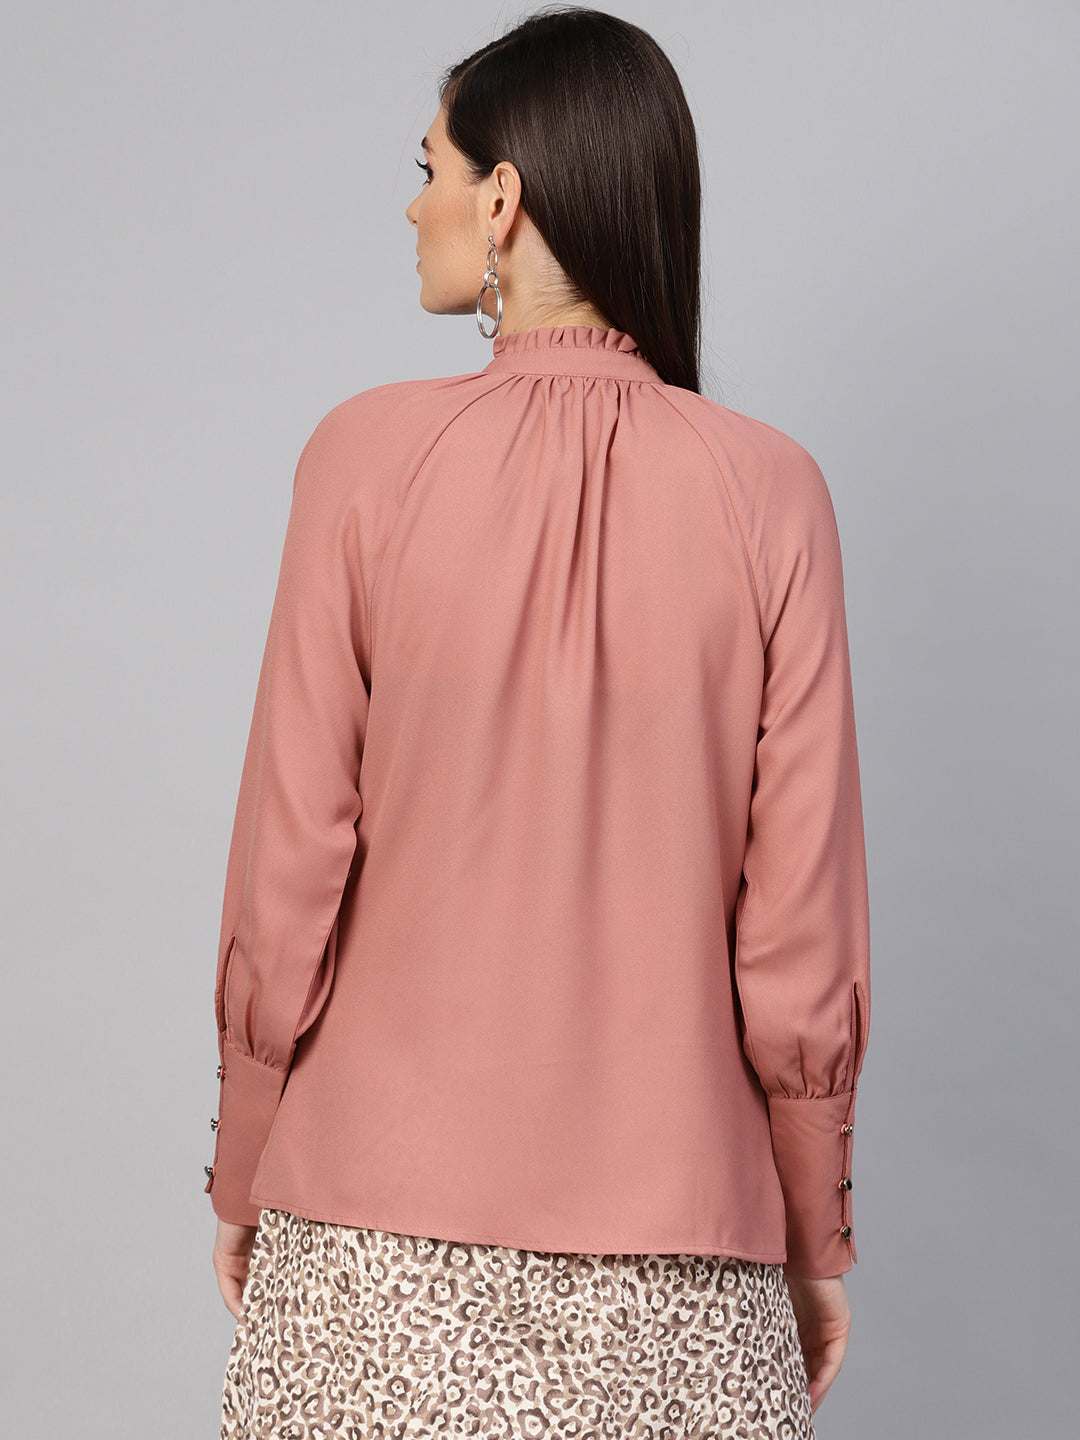 Baked Pink Pleated Collar Top